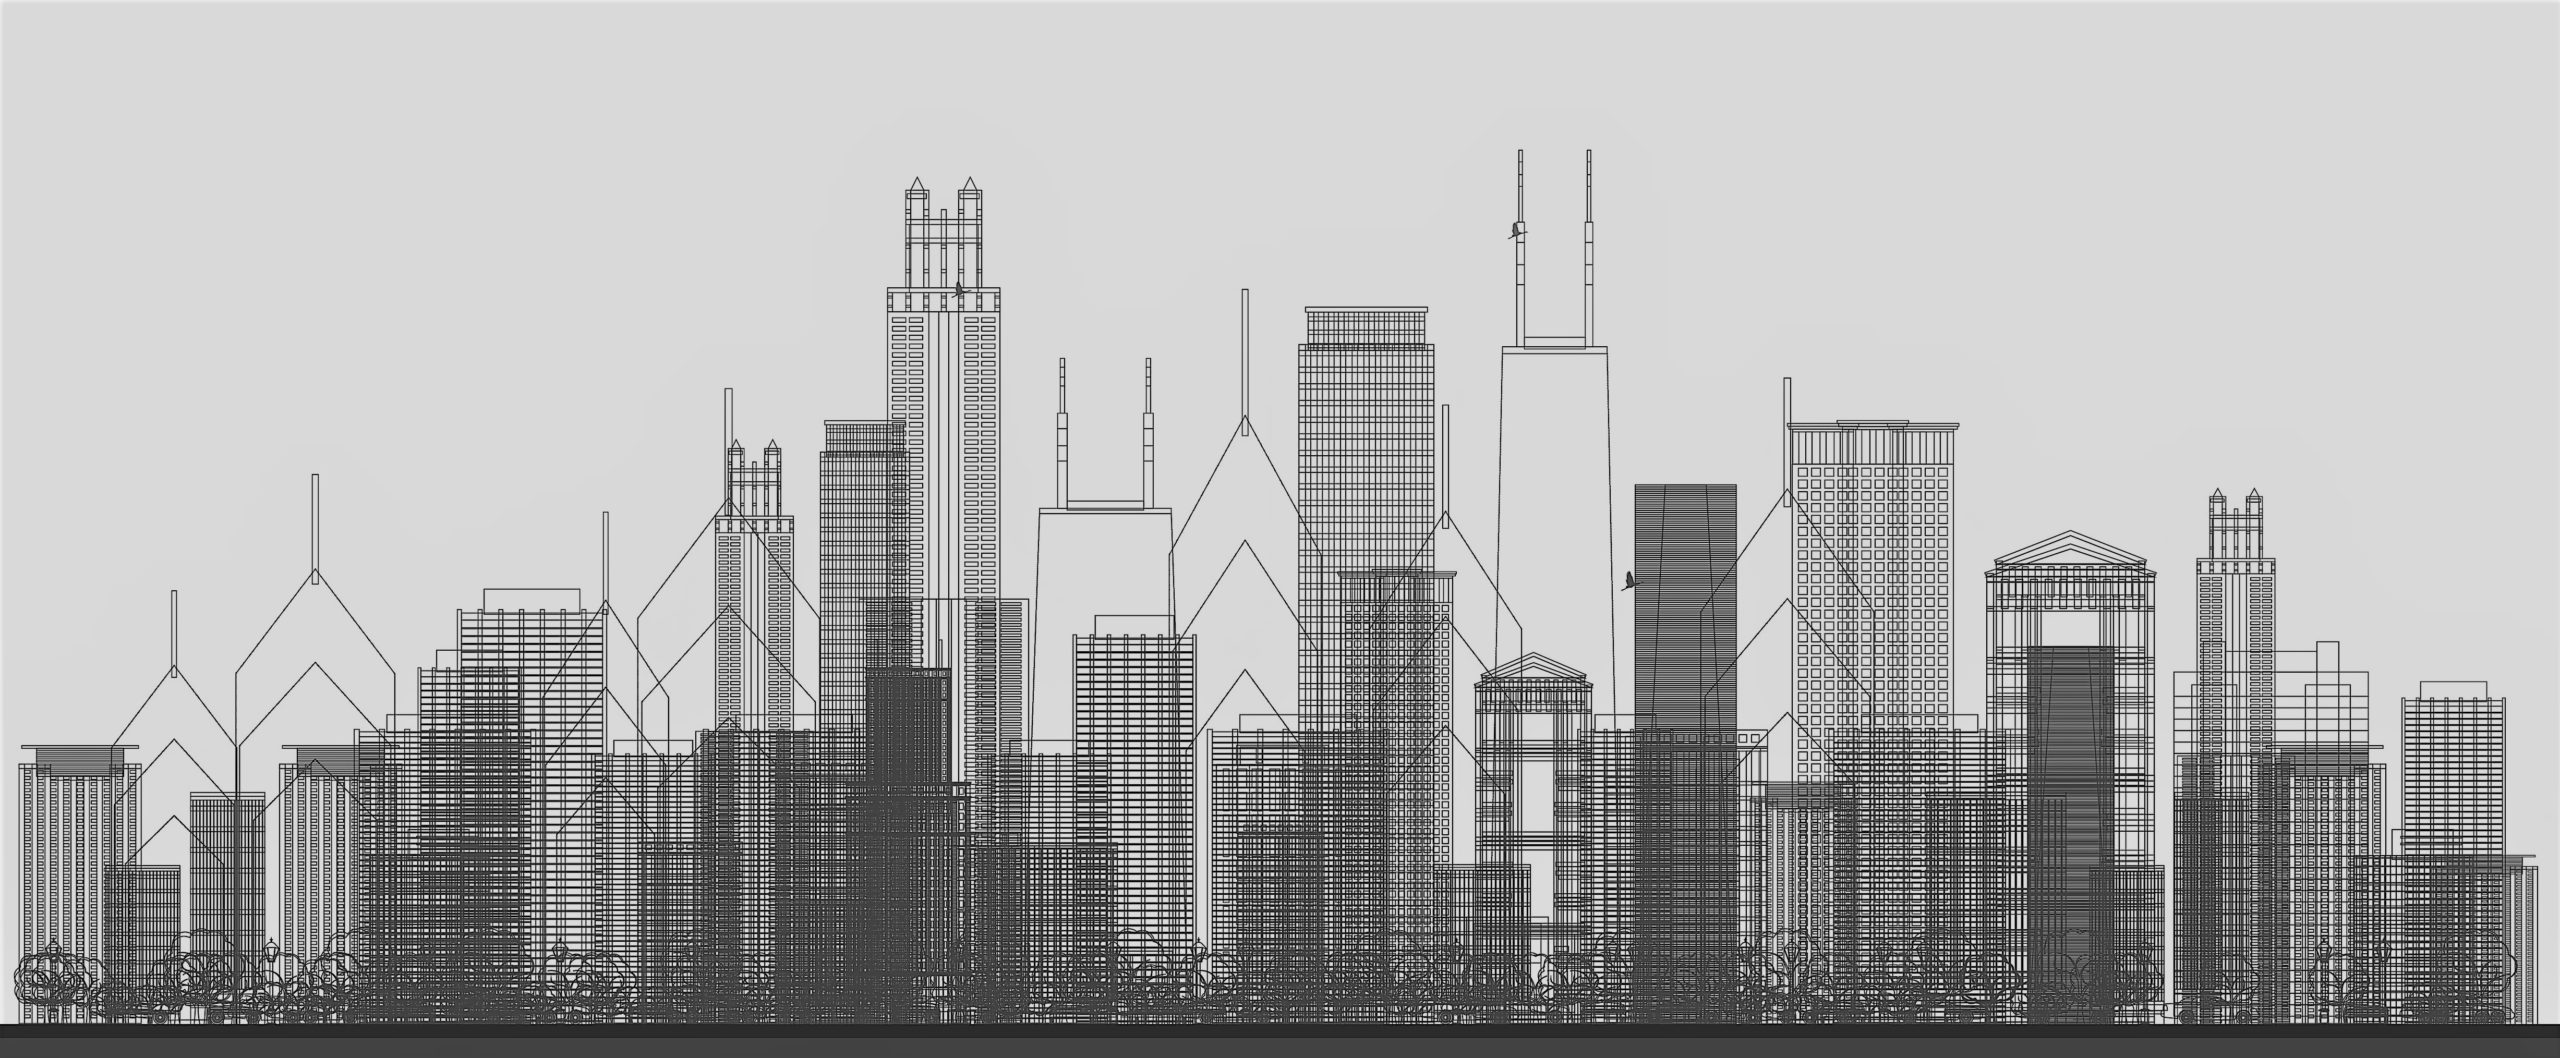 Outline Chicago city skyline with blue skyscrapers.